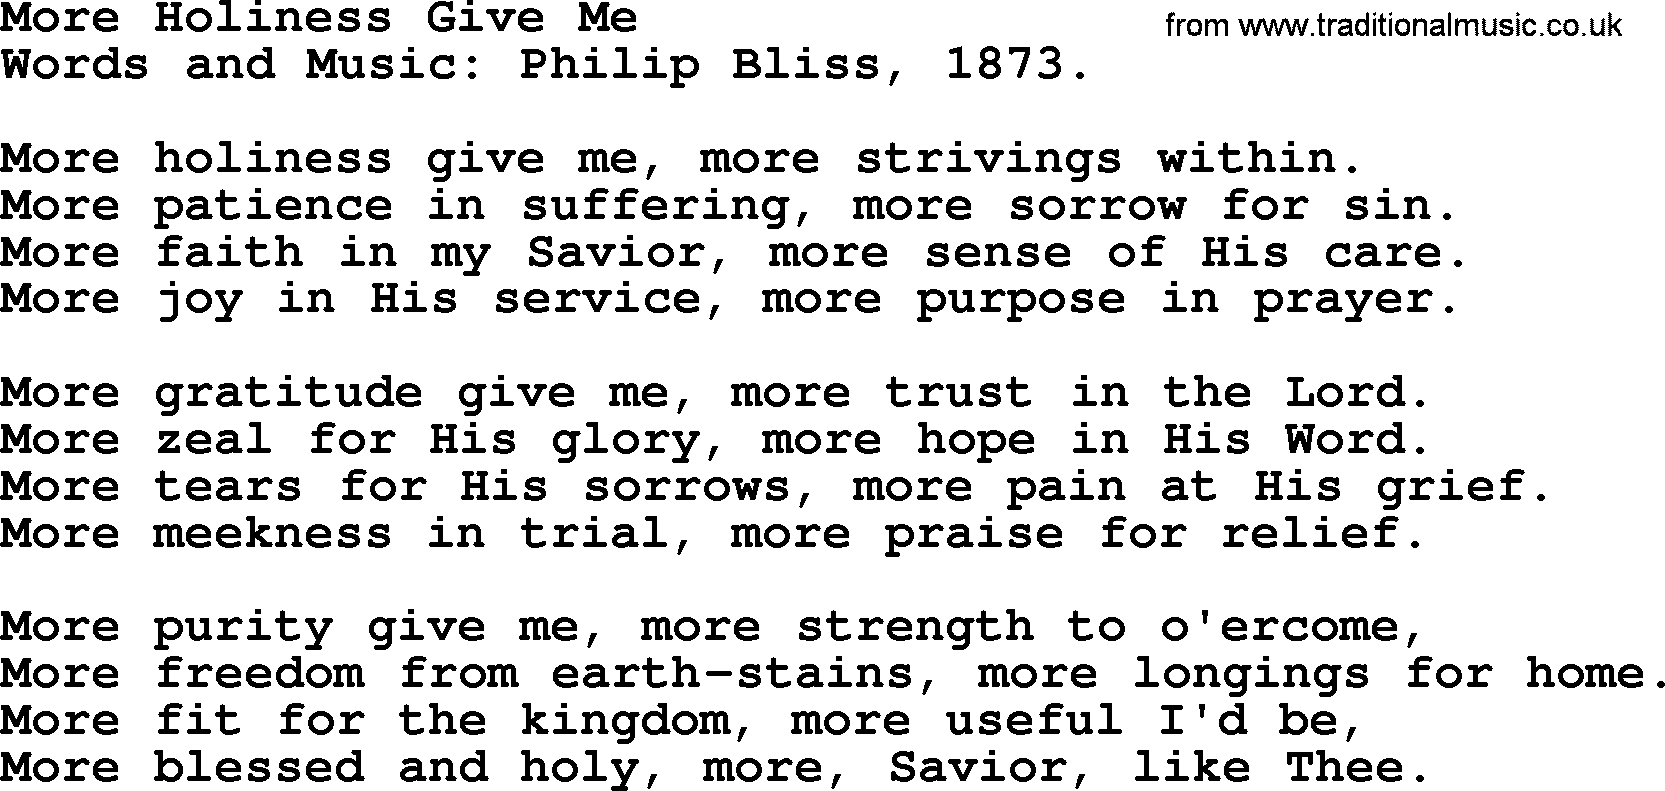 Philip Bliss Song: More Holiness Give Me, lyrics